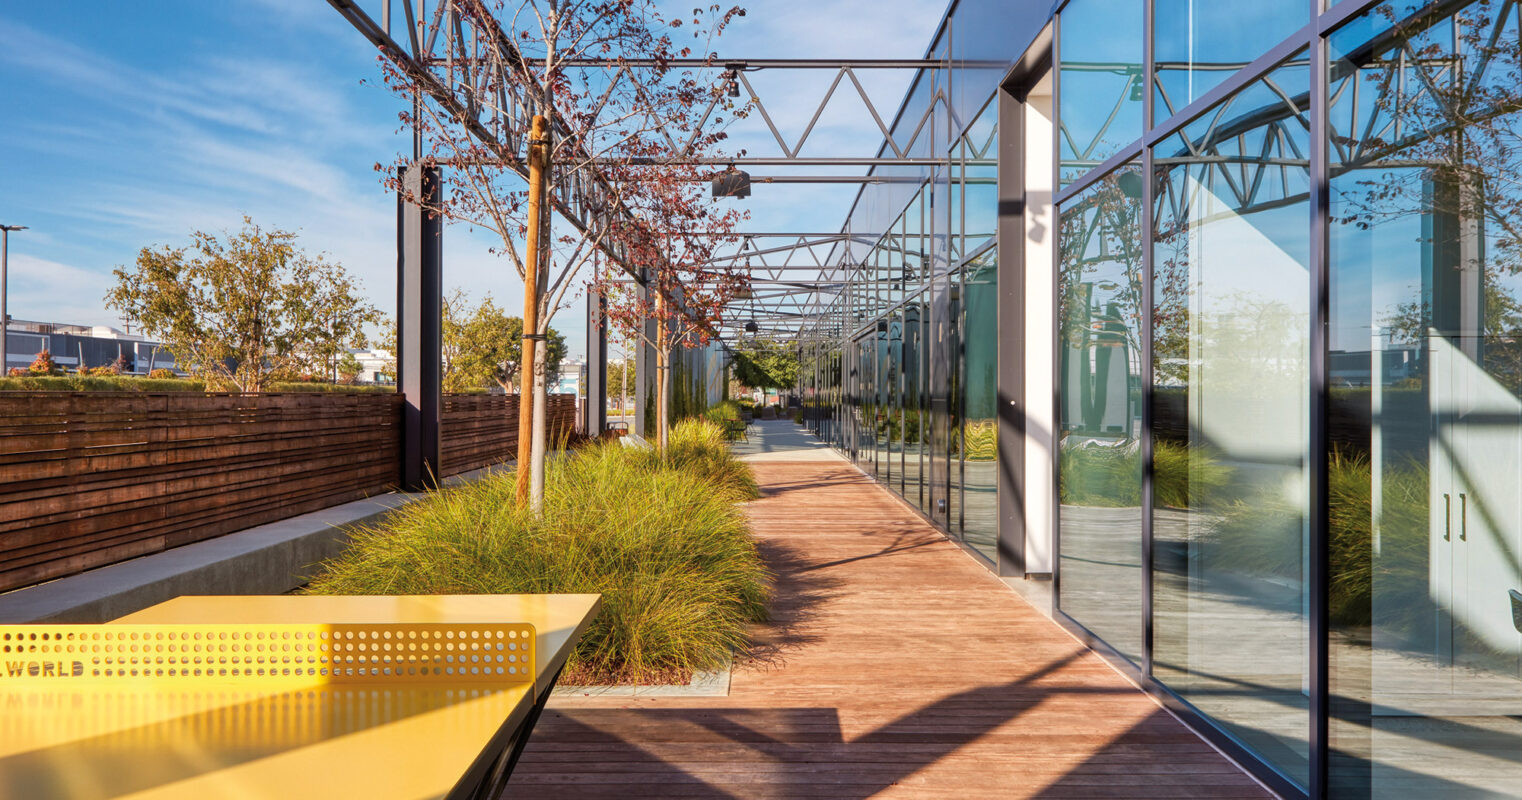 Modern outdoor walkway with a wooden path, glass panels, and geometric metal structures, complemented by greenery and contemporary yellow seating on a sunny day.